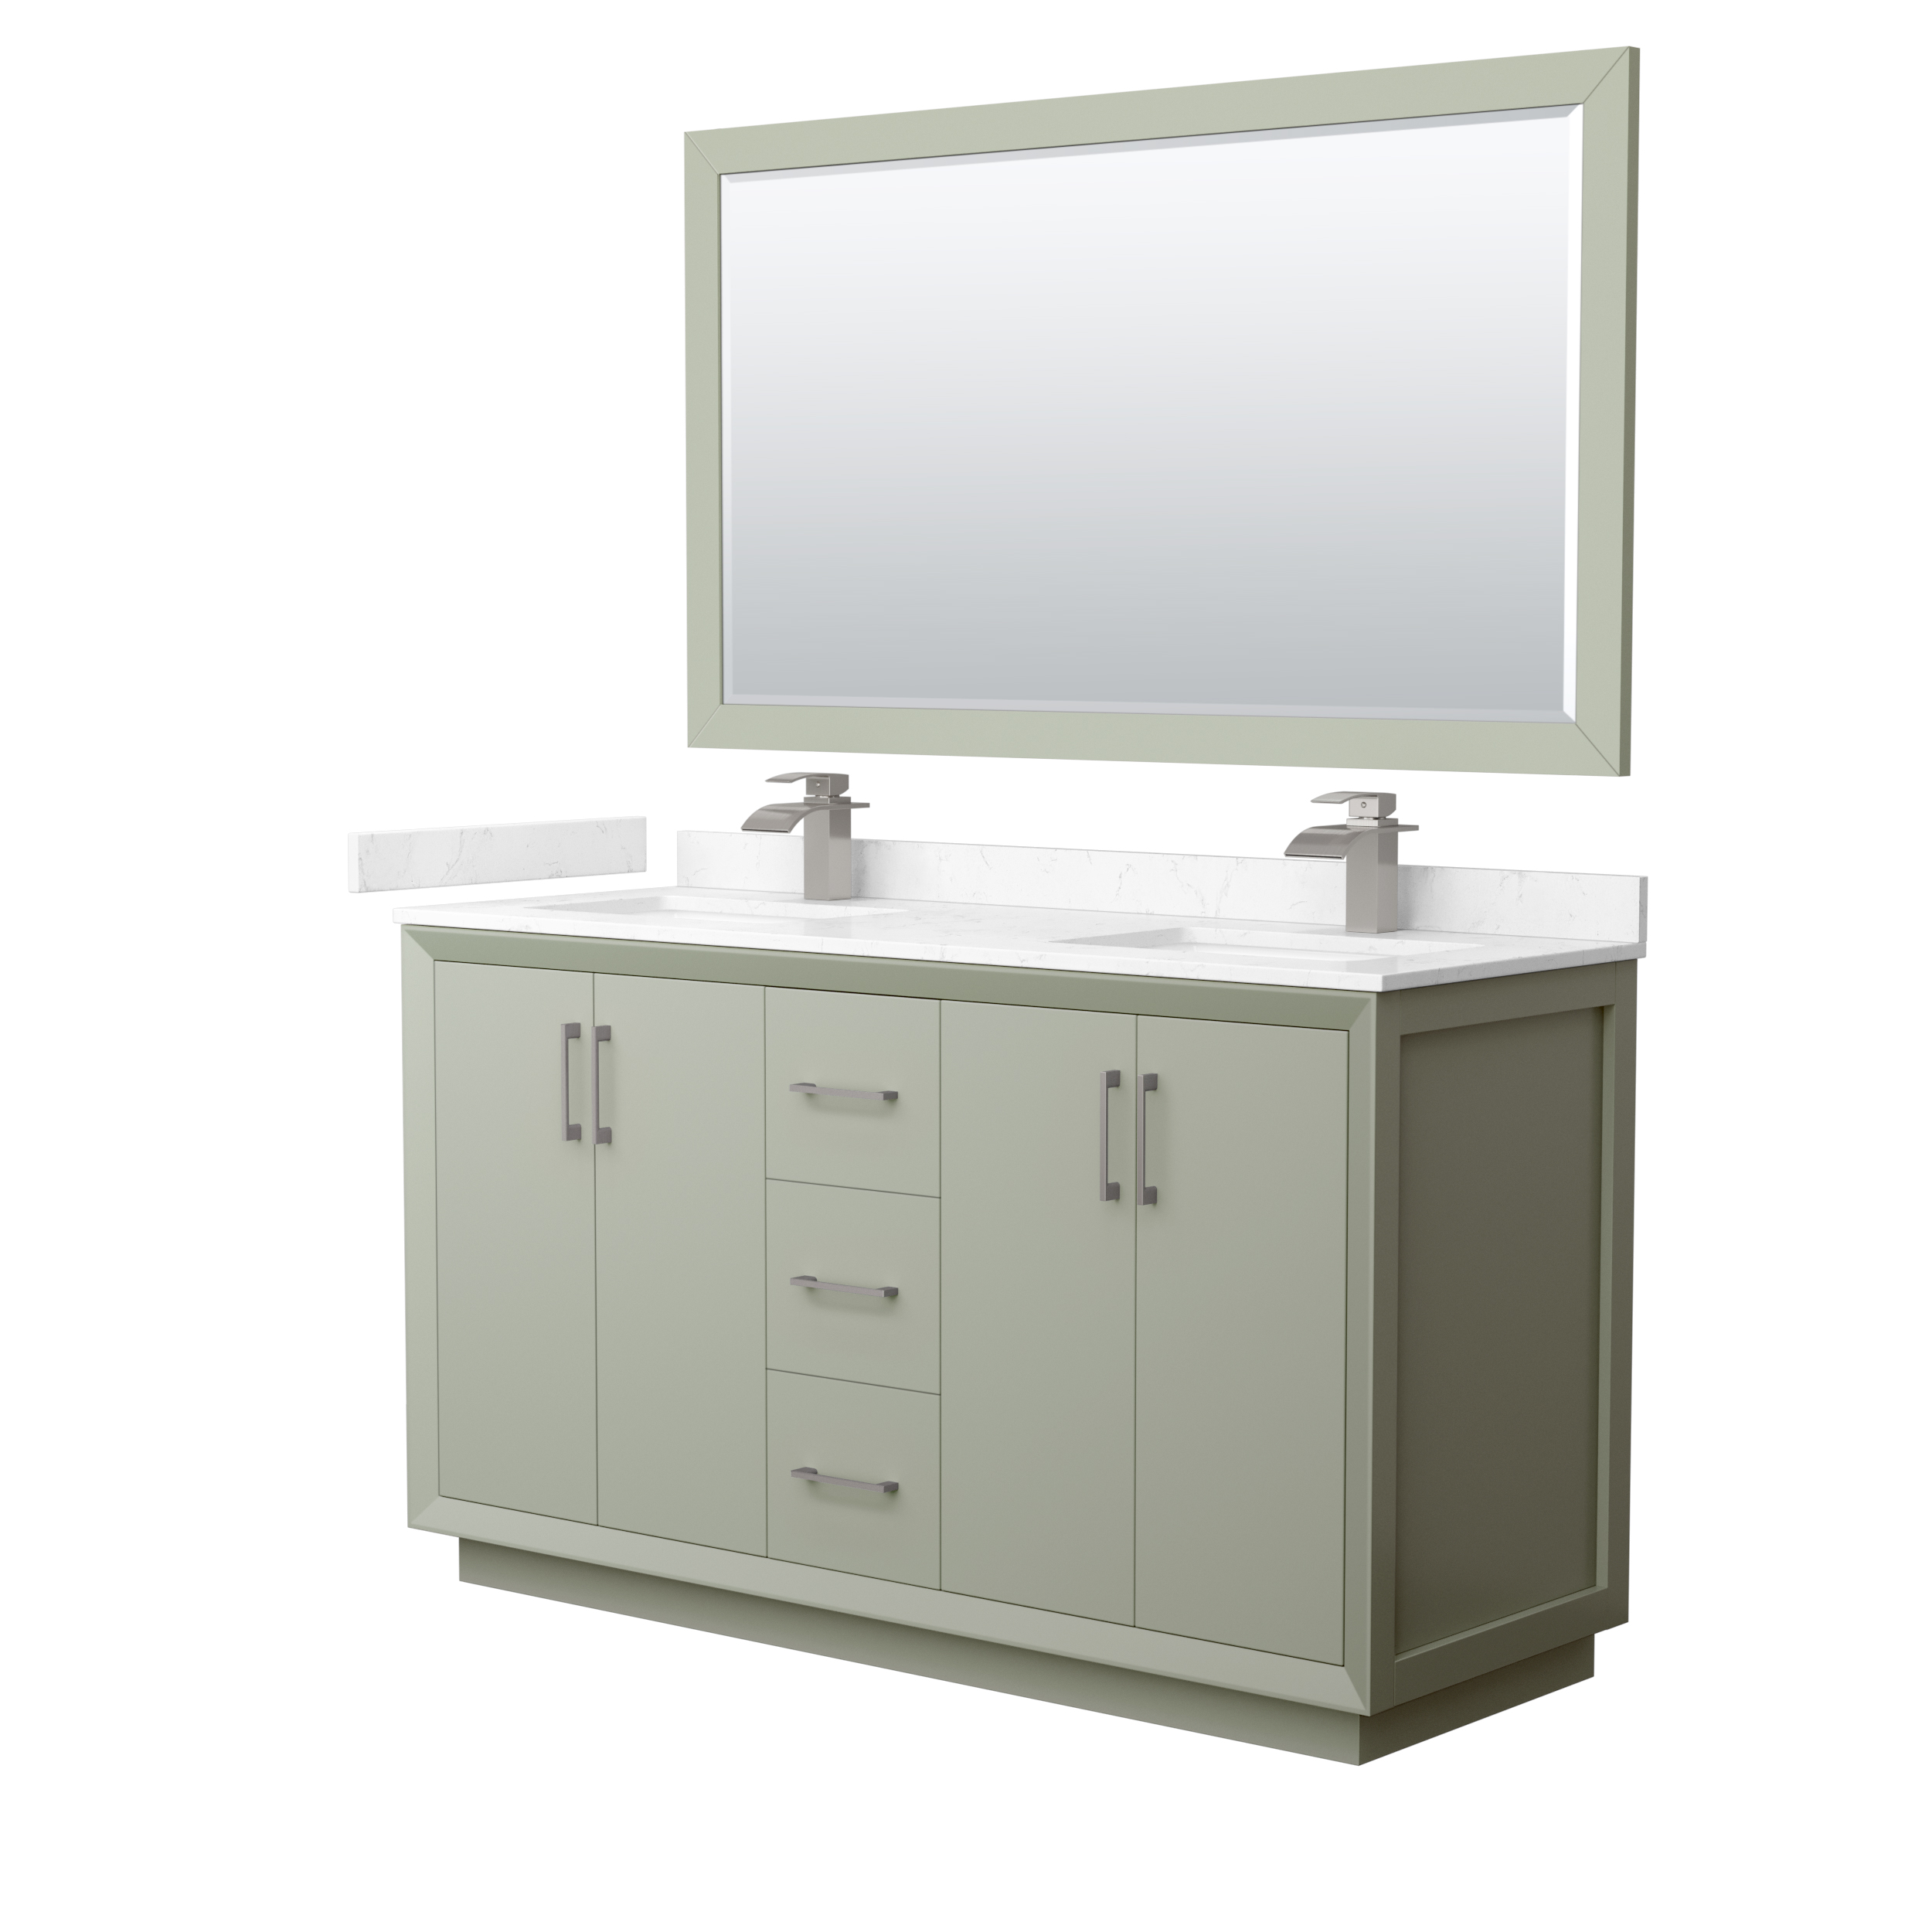 Strada 60" Double Vanity with optional Cultured Marble Counter - Dark Gray WC-4141-60-DBL-VAN-DKG-